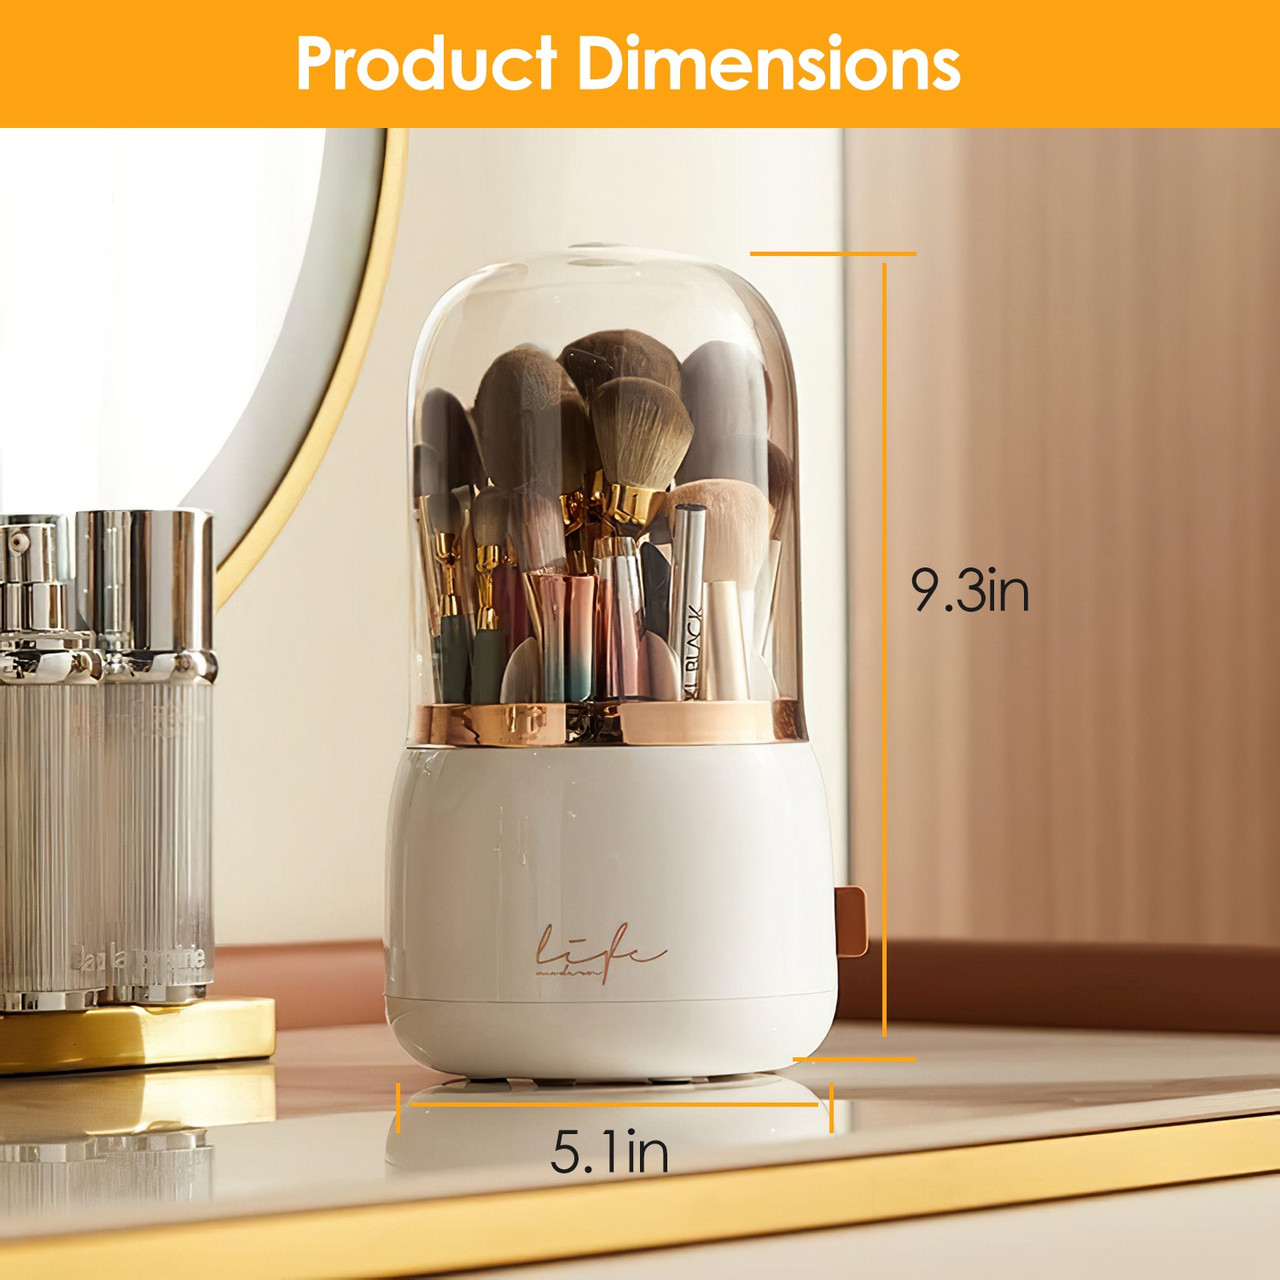 360° Rotating Makeup Brush Holder by NewHome product image